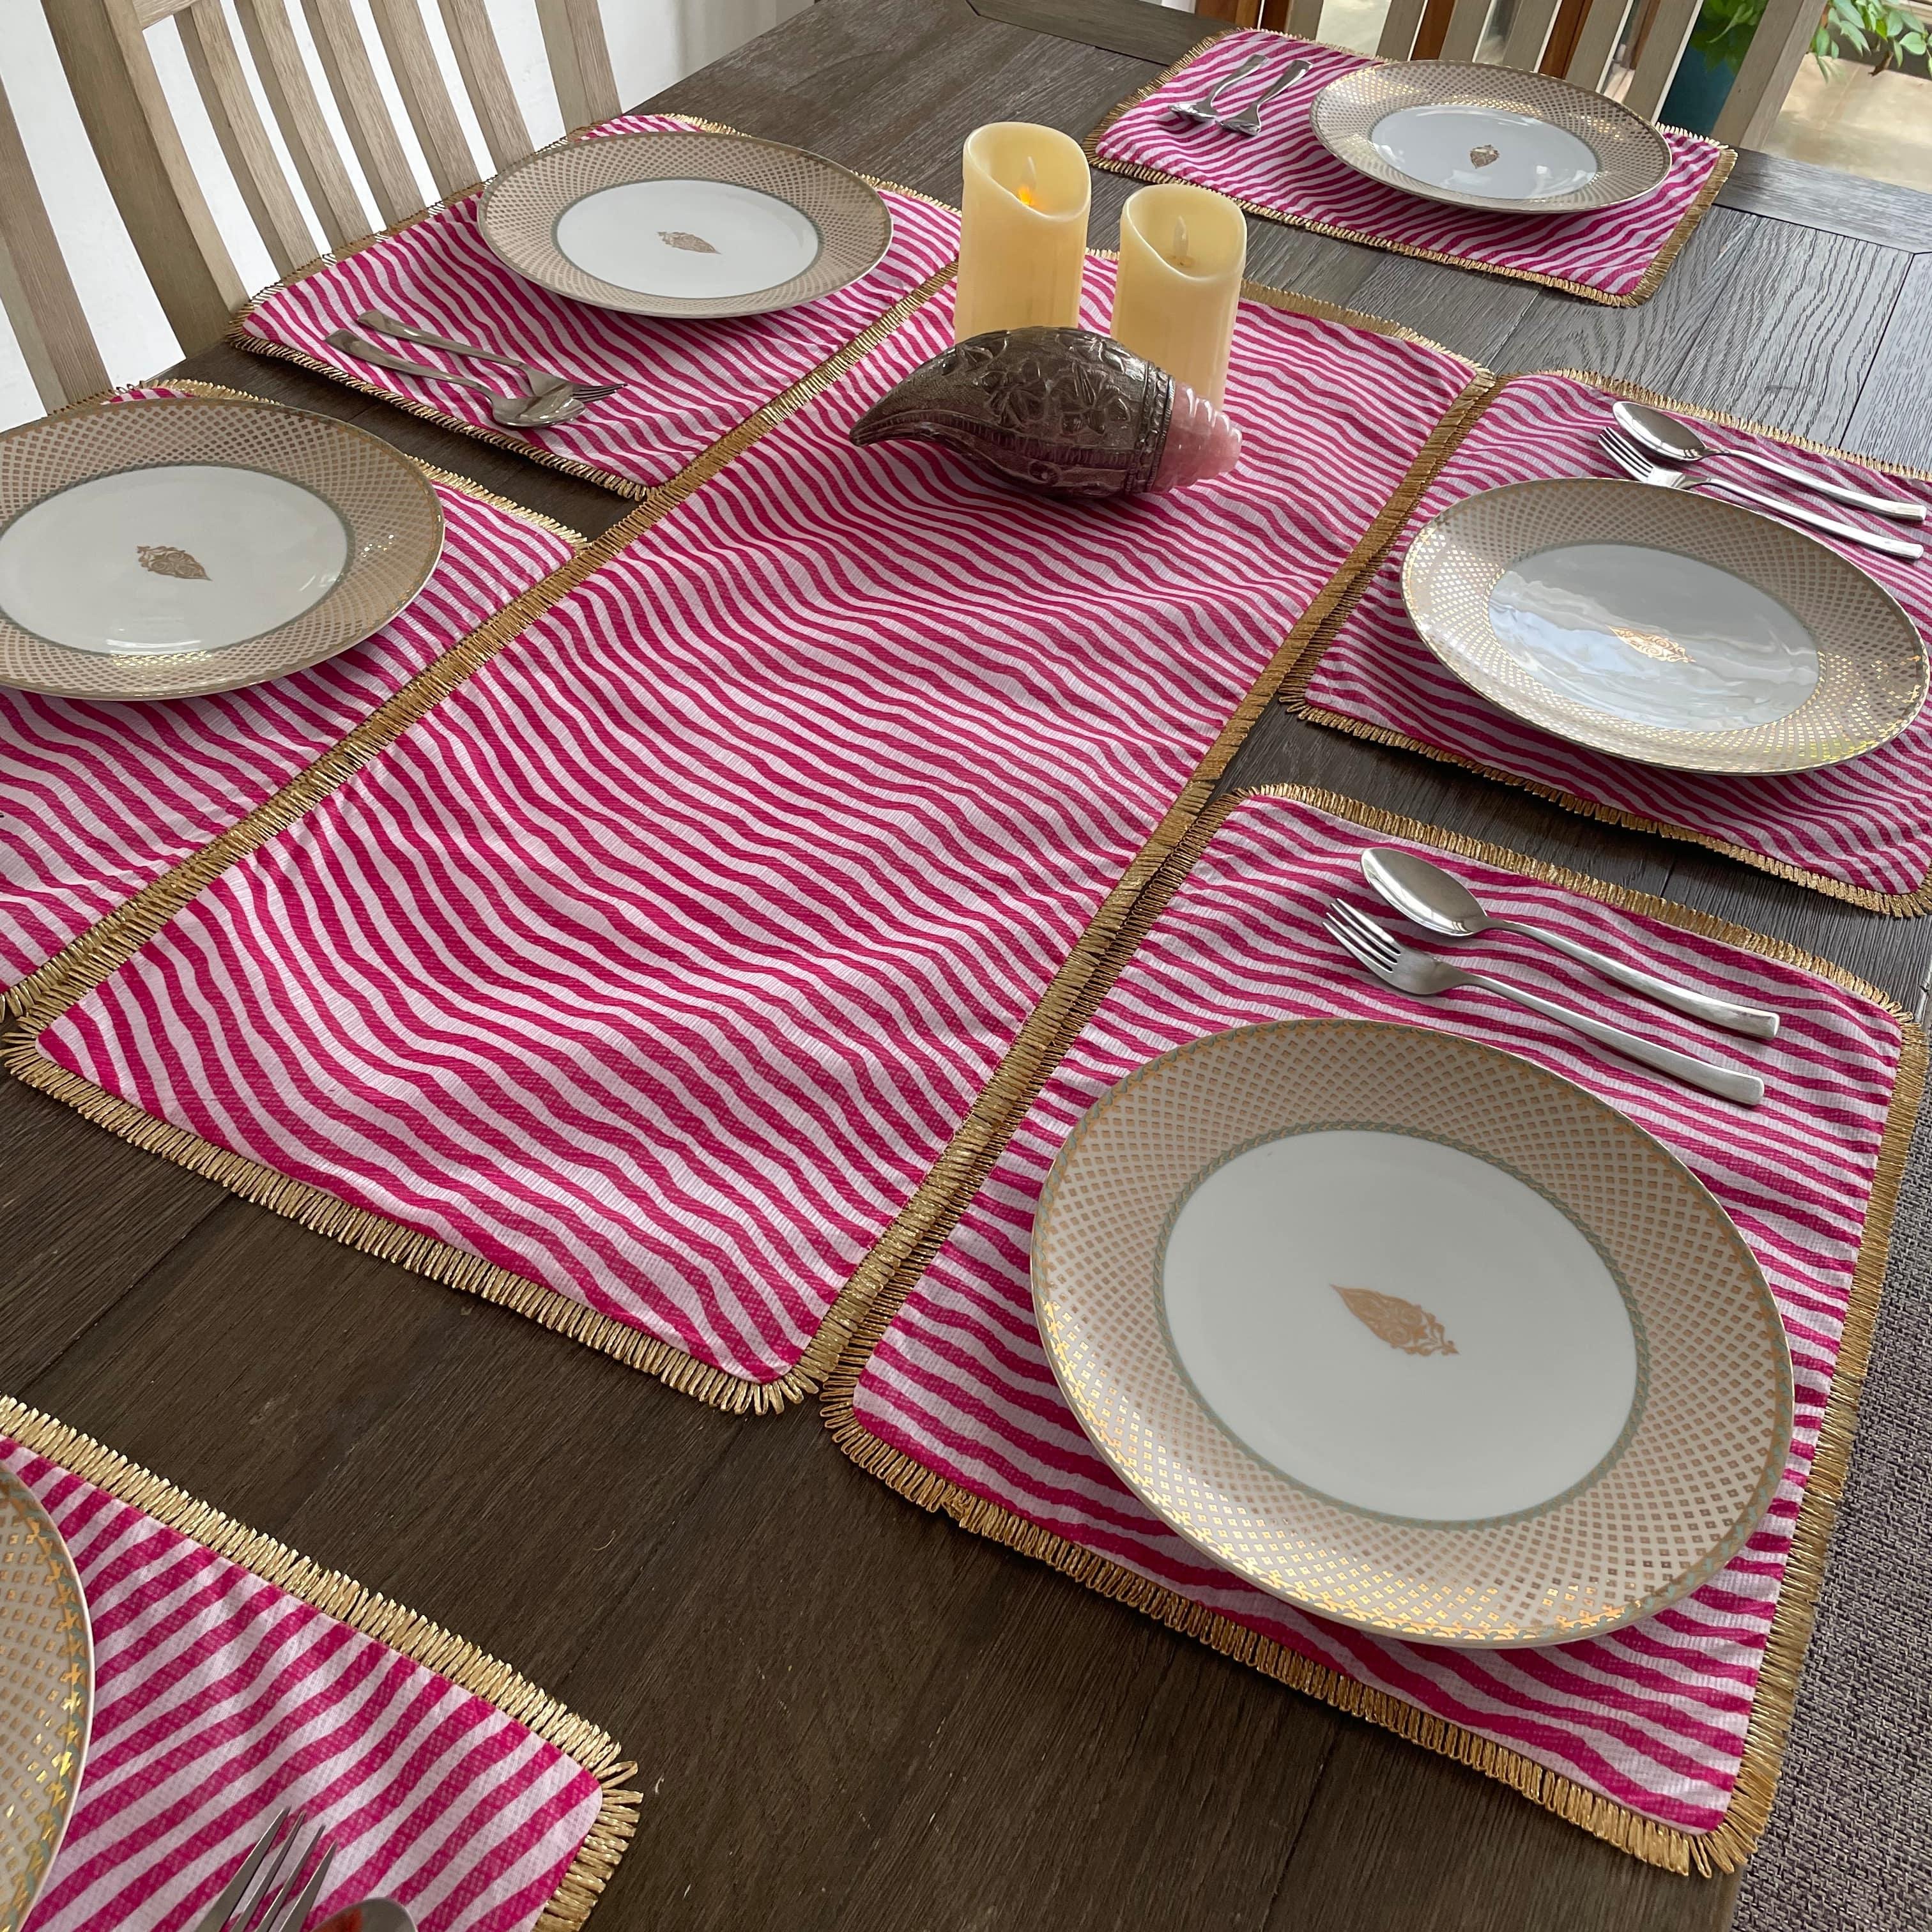 Masalla Placemats Dining Table Mat Table Decor Washable Non Slip Trellis Rectangle 12 x 18 (Set of 2) East Urban Home Color: Rose Gold